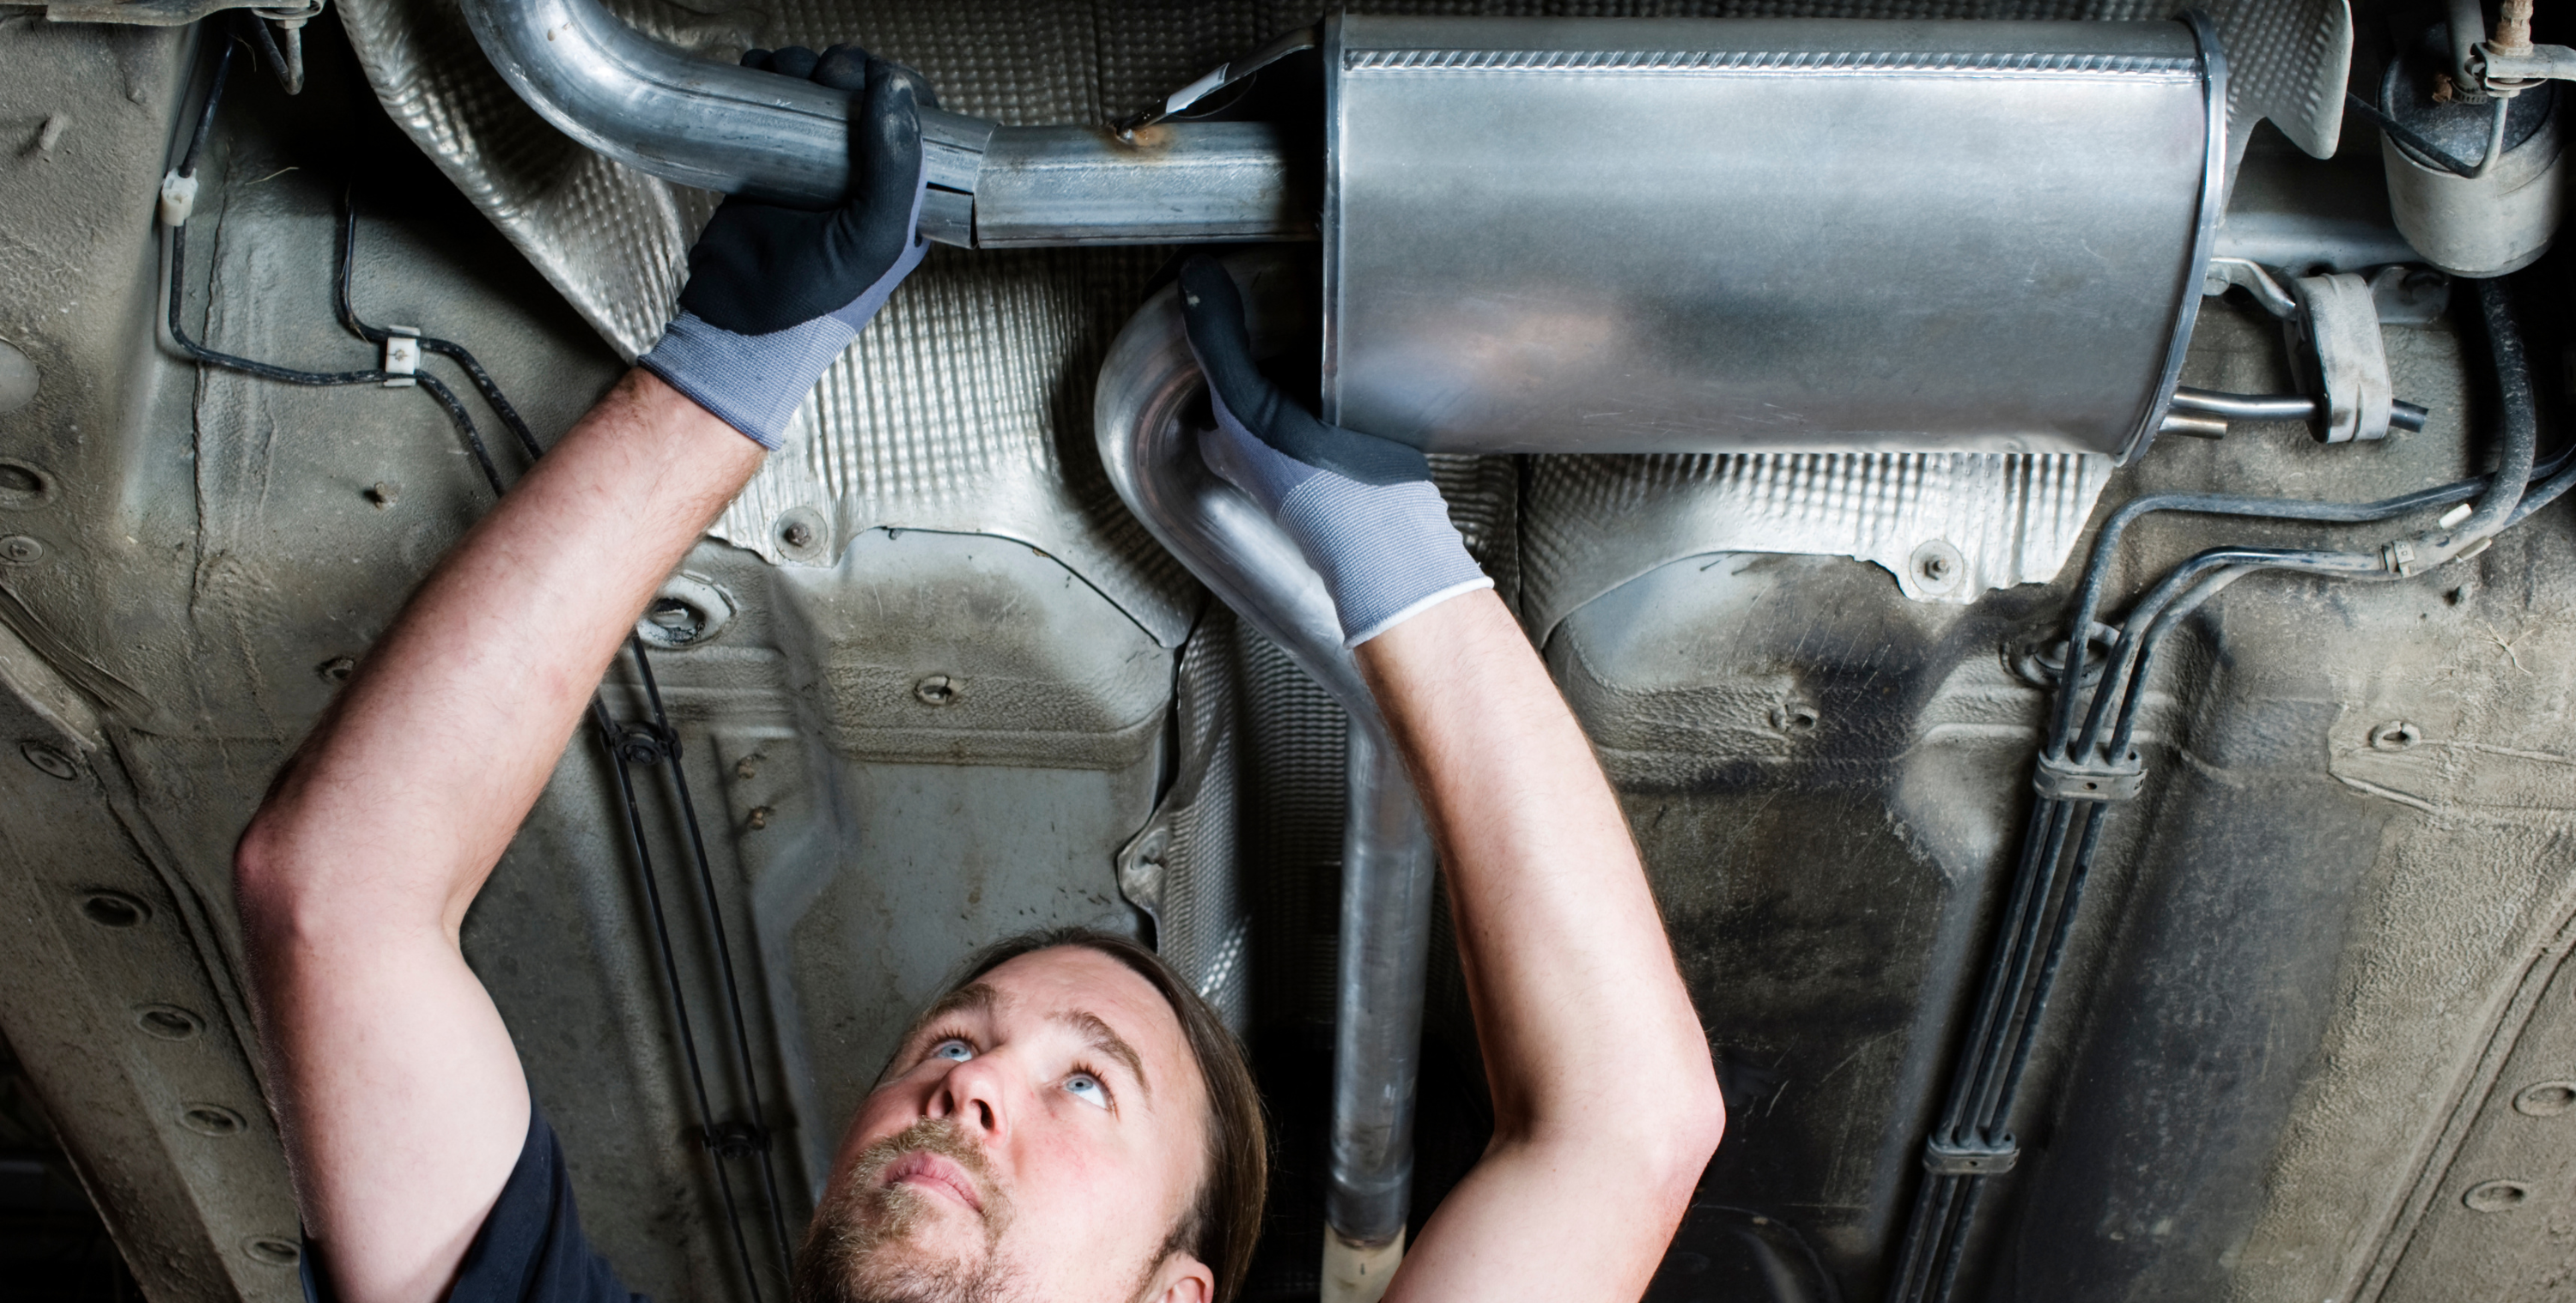 The Top Reasons Why Your Exhaust System is Making Noise